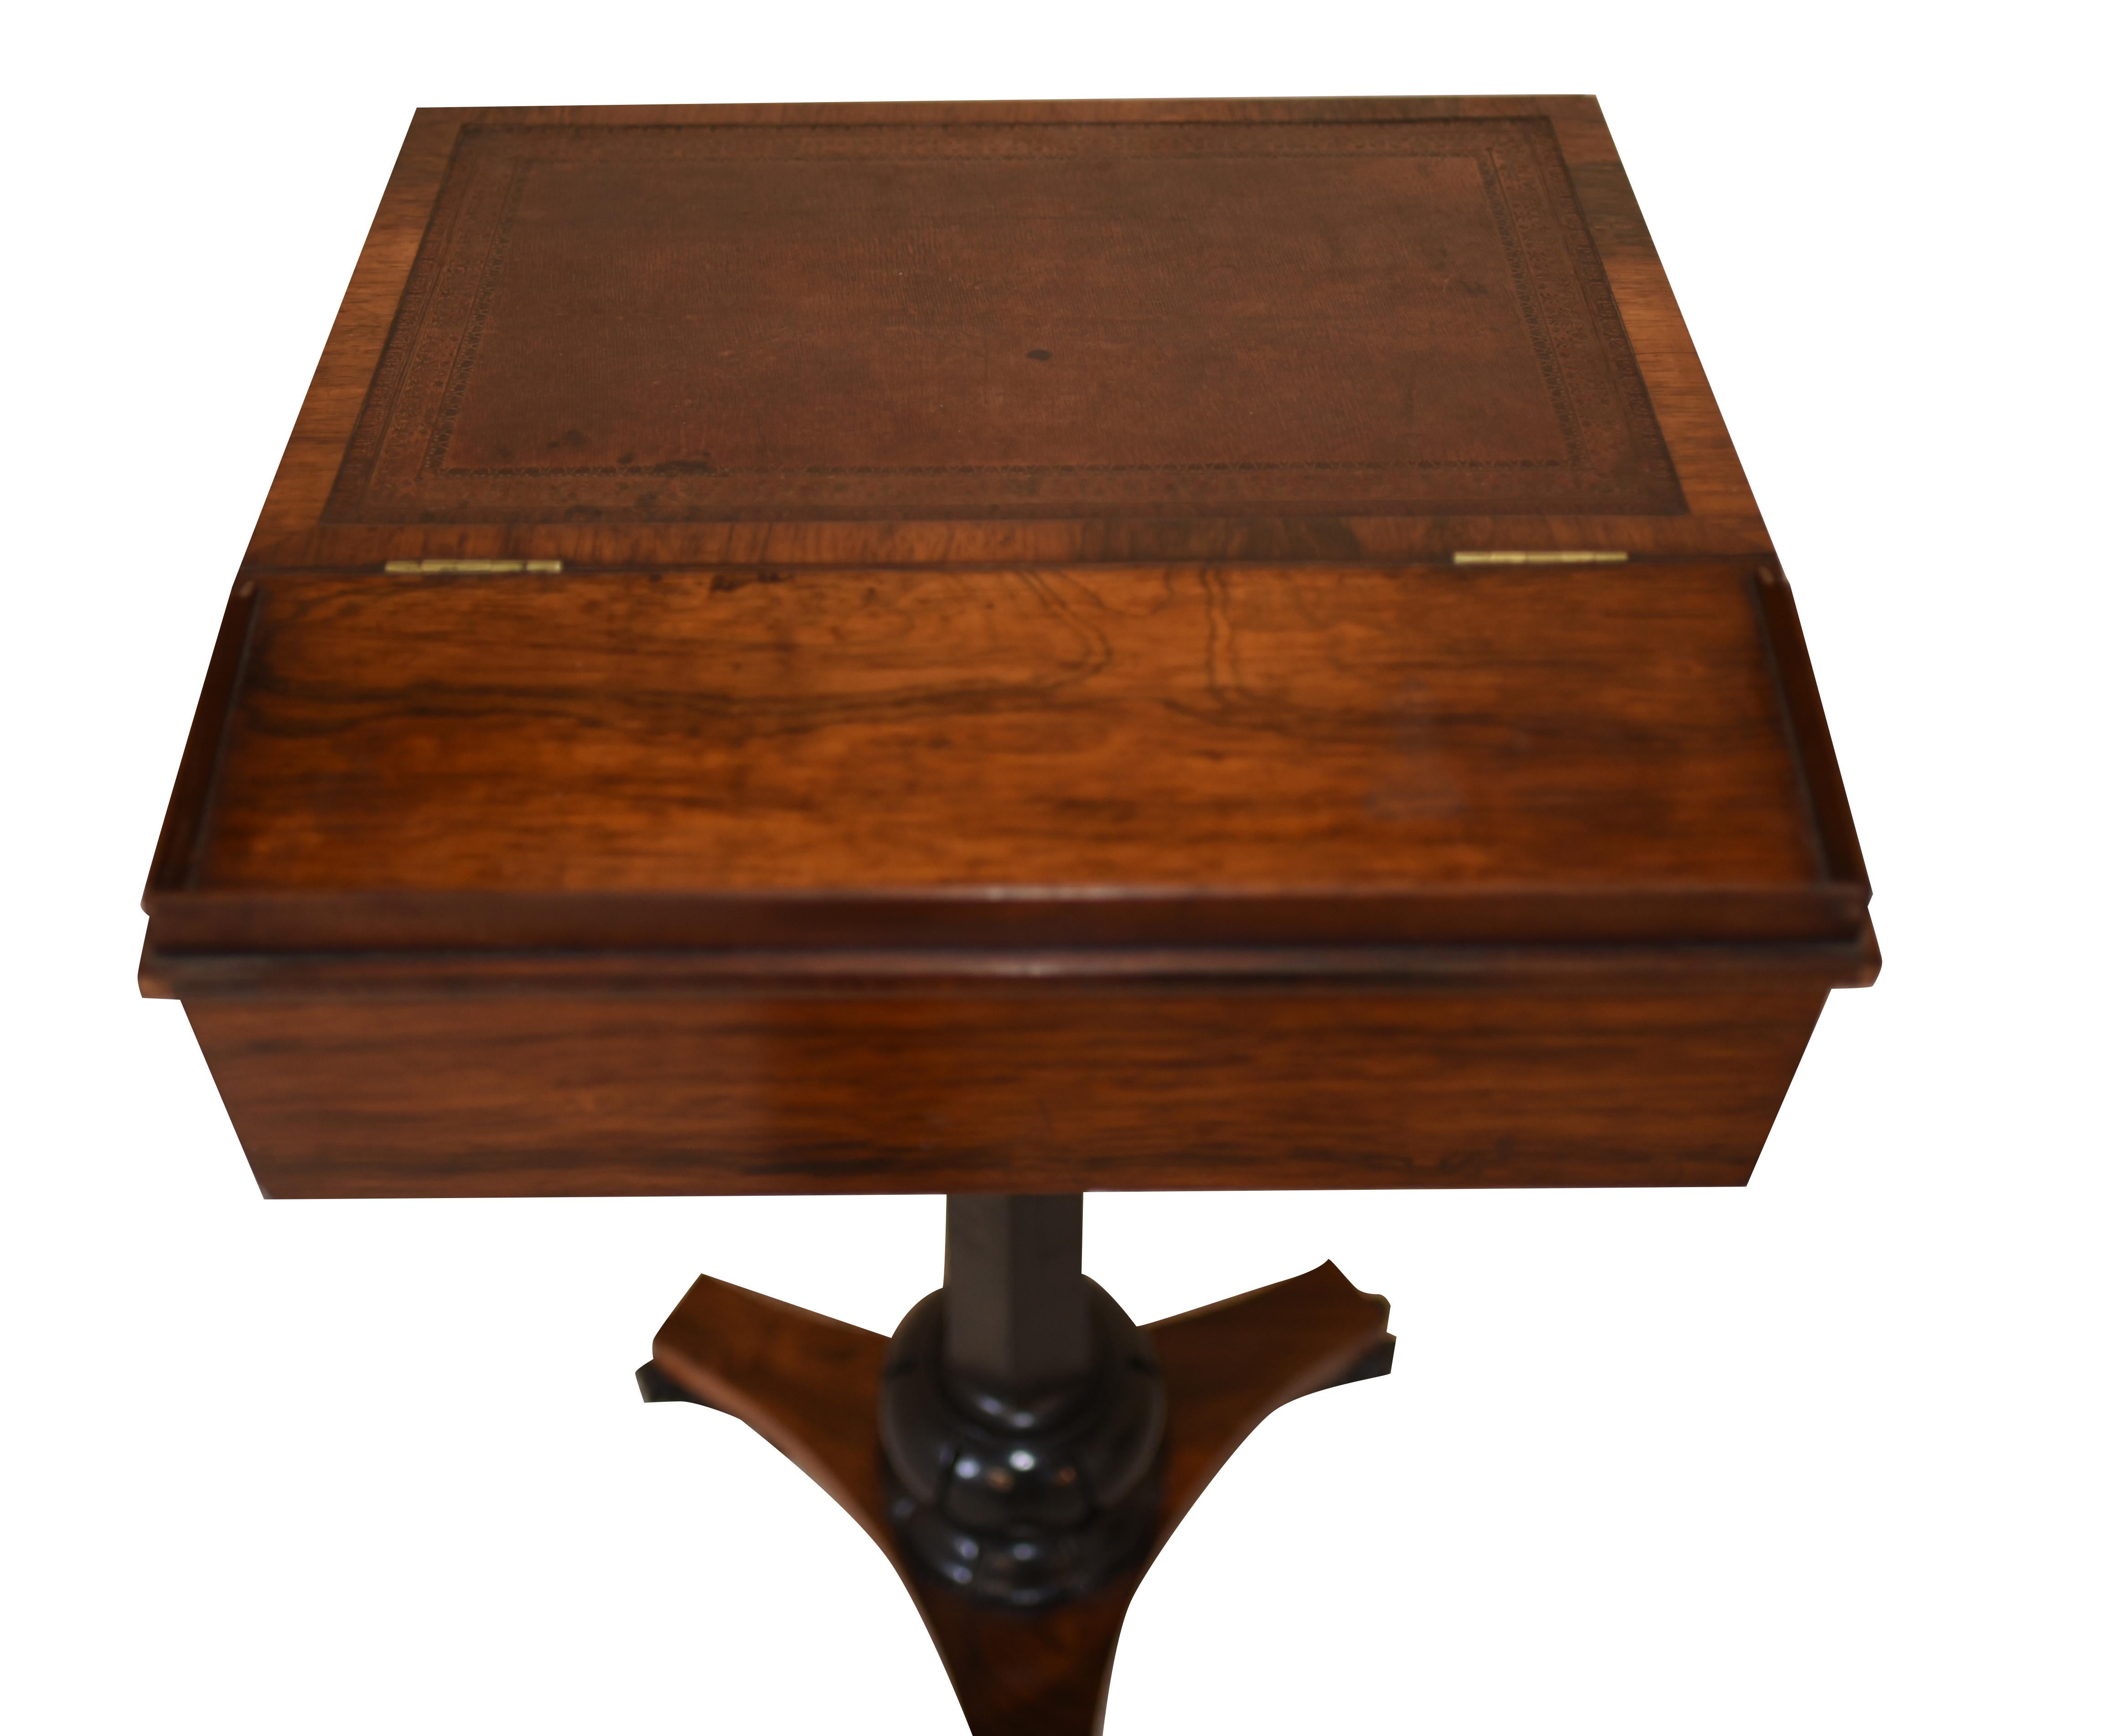 Quirky antique Victorian students desk
Could work also as a lecturn 
Top opens out to reveal storage area
Has a great mechanism where you open the drawer and that activates the ink section popping out from the side
Offered in great condition,